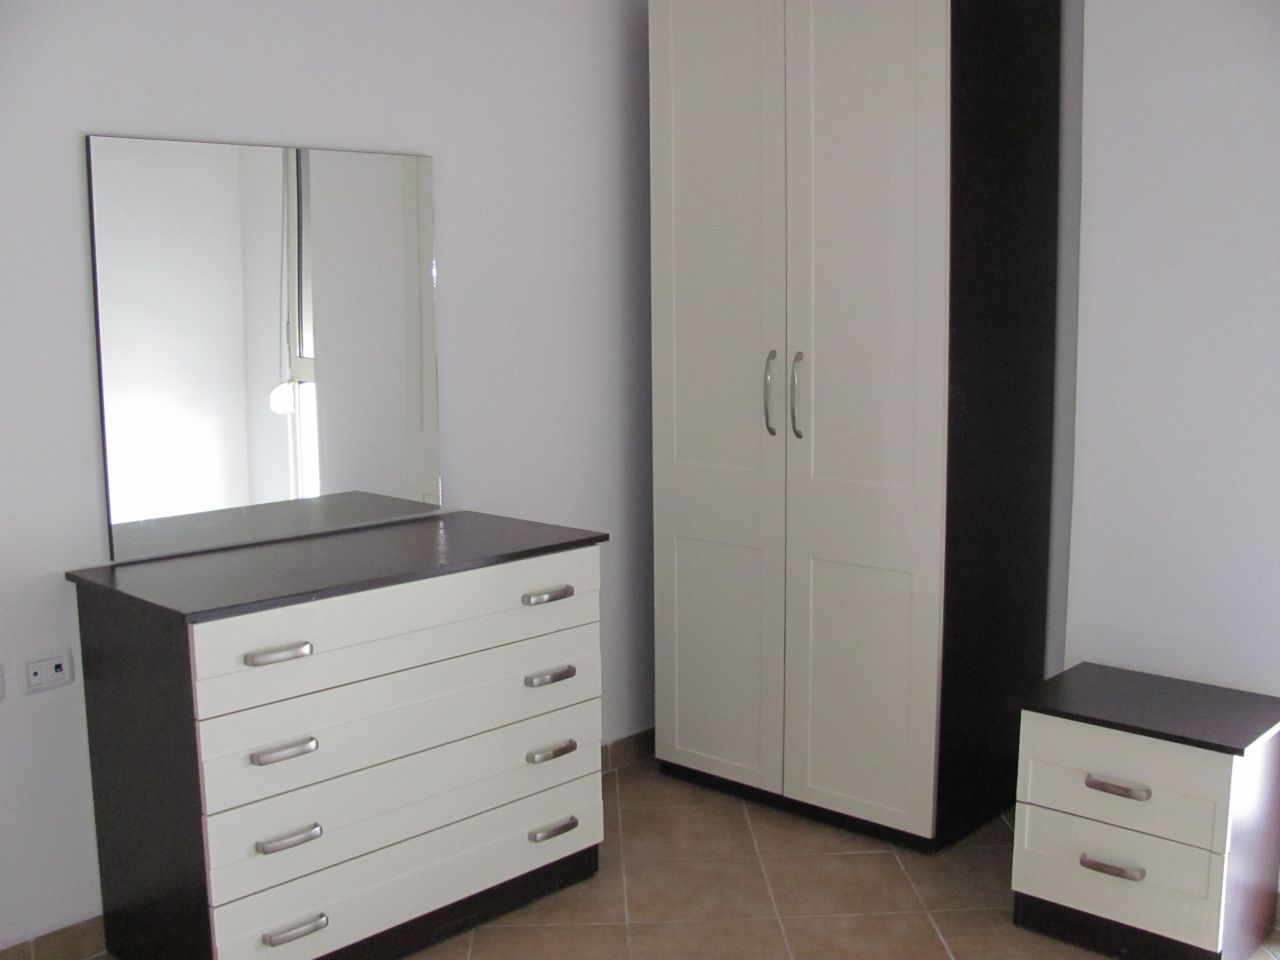 2 bedrooms apartment for rent in tirana, very close to the center 